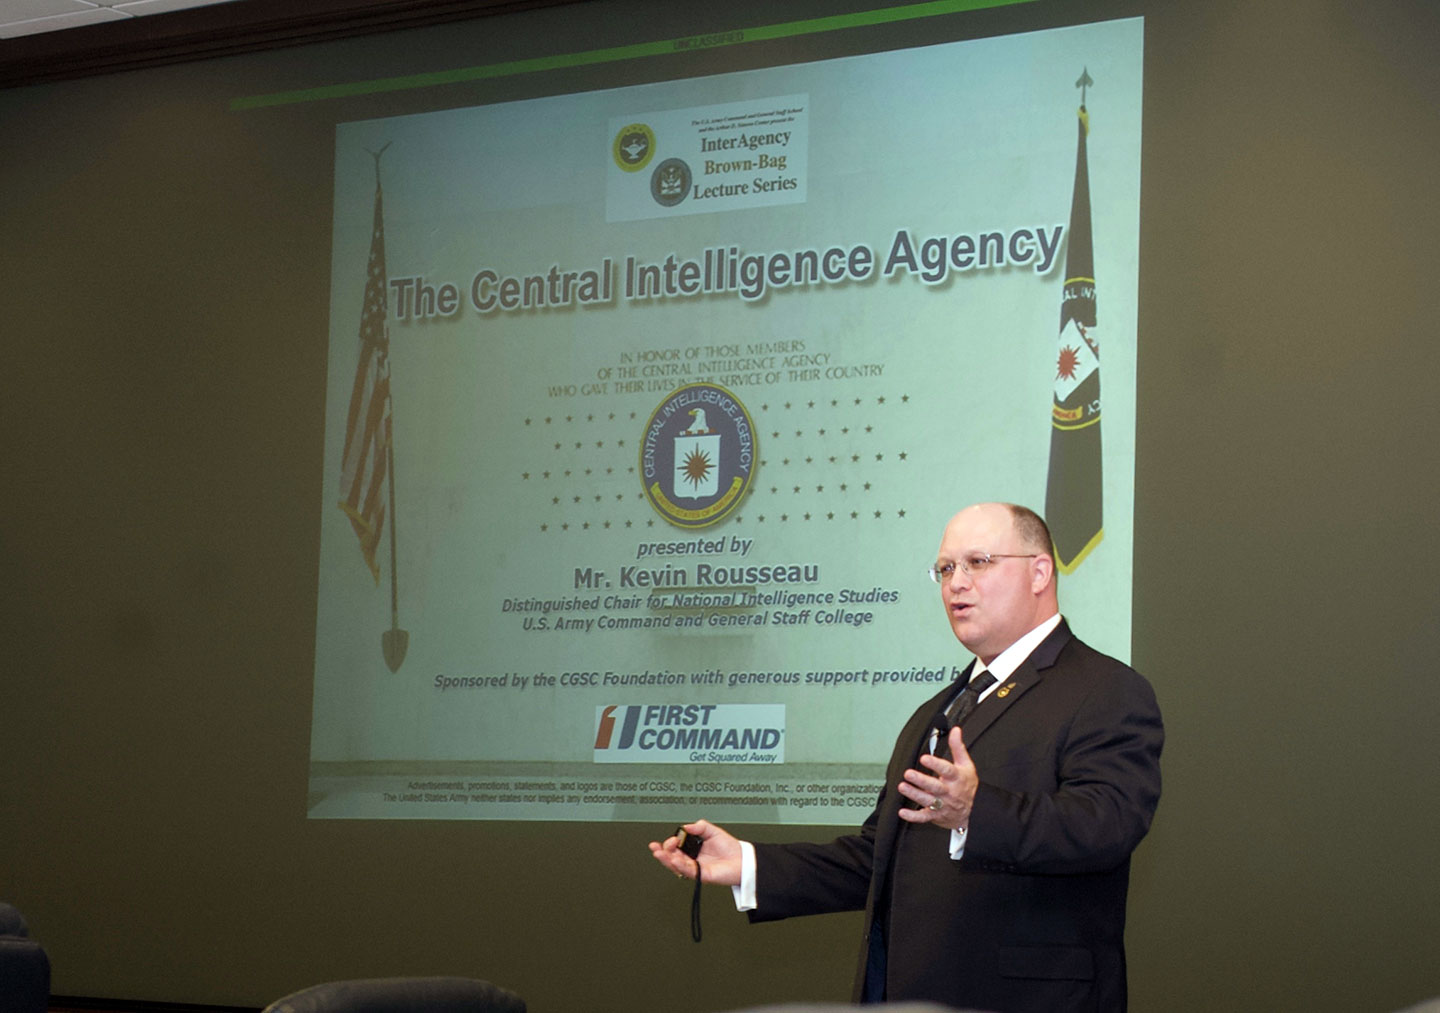 Photo of Kevin Rousseau, the CGSC Distinguished Chair for National Intelligence Studies and a member of the Central Intelligence Agency (CIA), delivering his presentation on the CIA in the latest the InterAgency Brown-Bag Lecture on April 3, in the in the Arnold Conference Room of the Lewis and Clark Center on Fort Leavenworth.